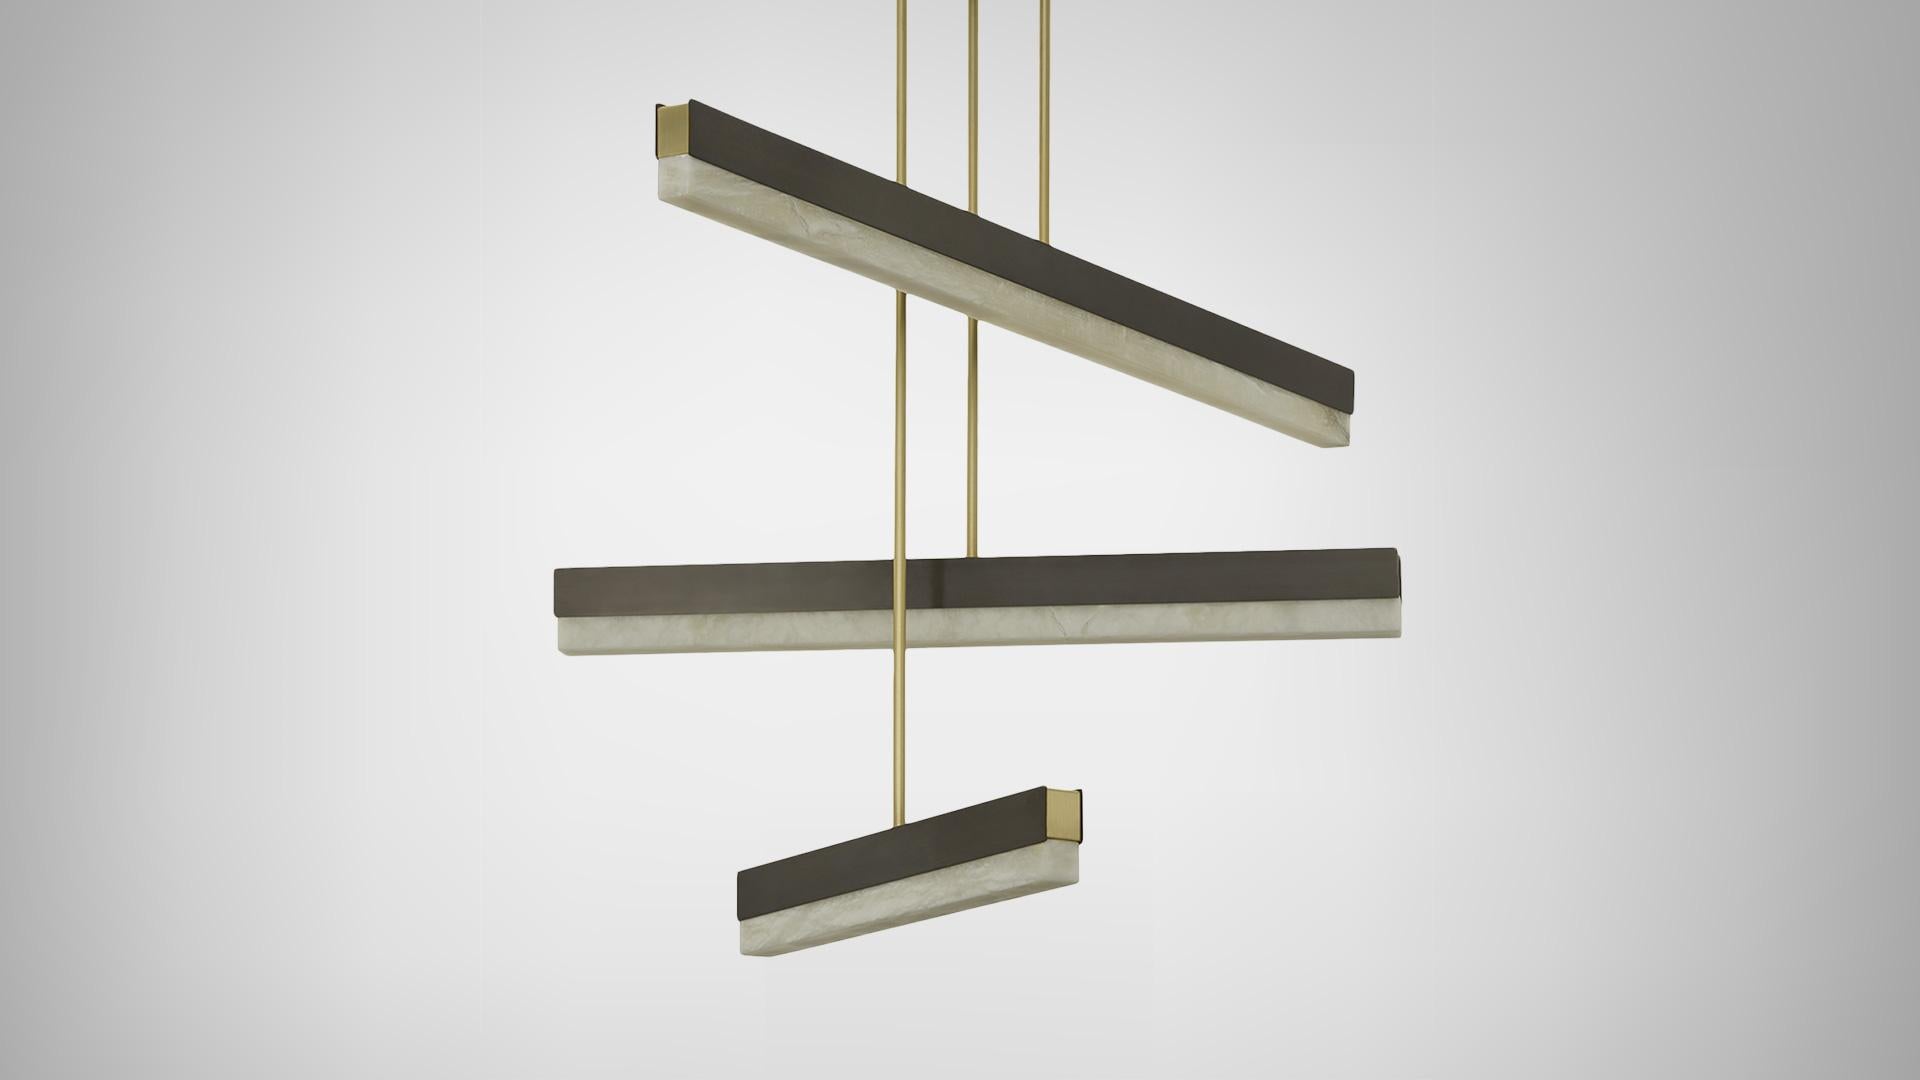 Multi-Sized Artés Collective lamp by CTO Lighting
Materials: bronze with satin brass details and honed alabaster
Dimensions: 119 x H - Specified Height needed (cm).

All our lamps can be wired according to each country. If sold to the USA it will be